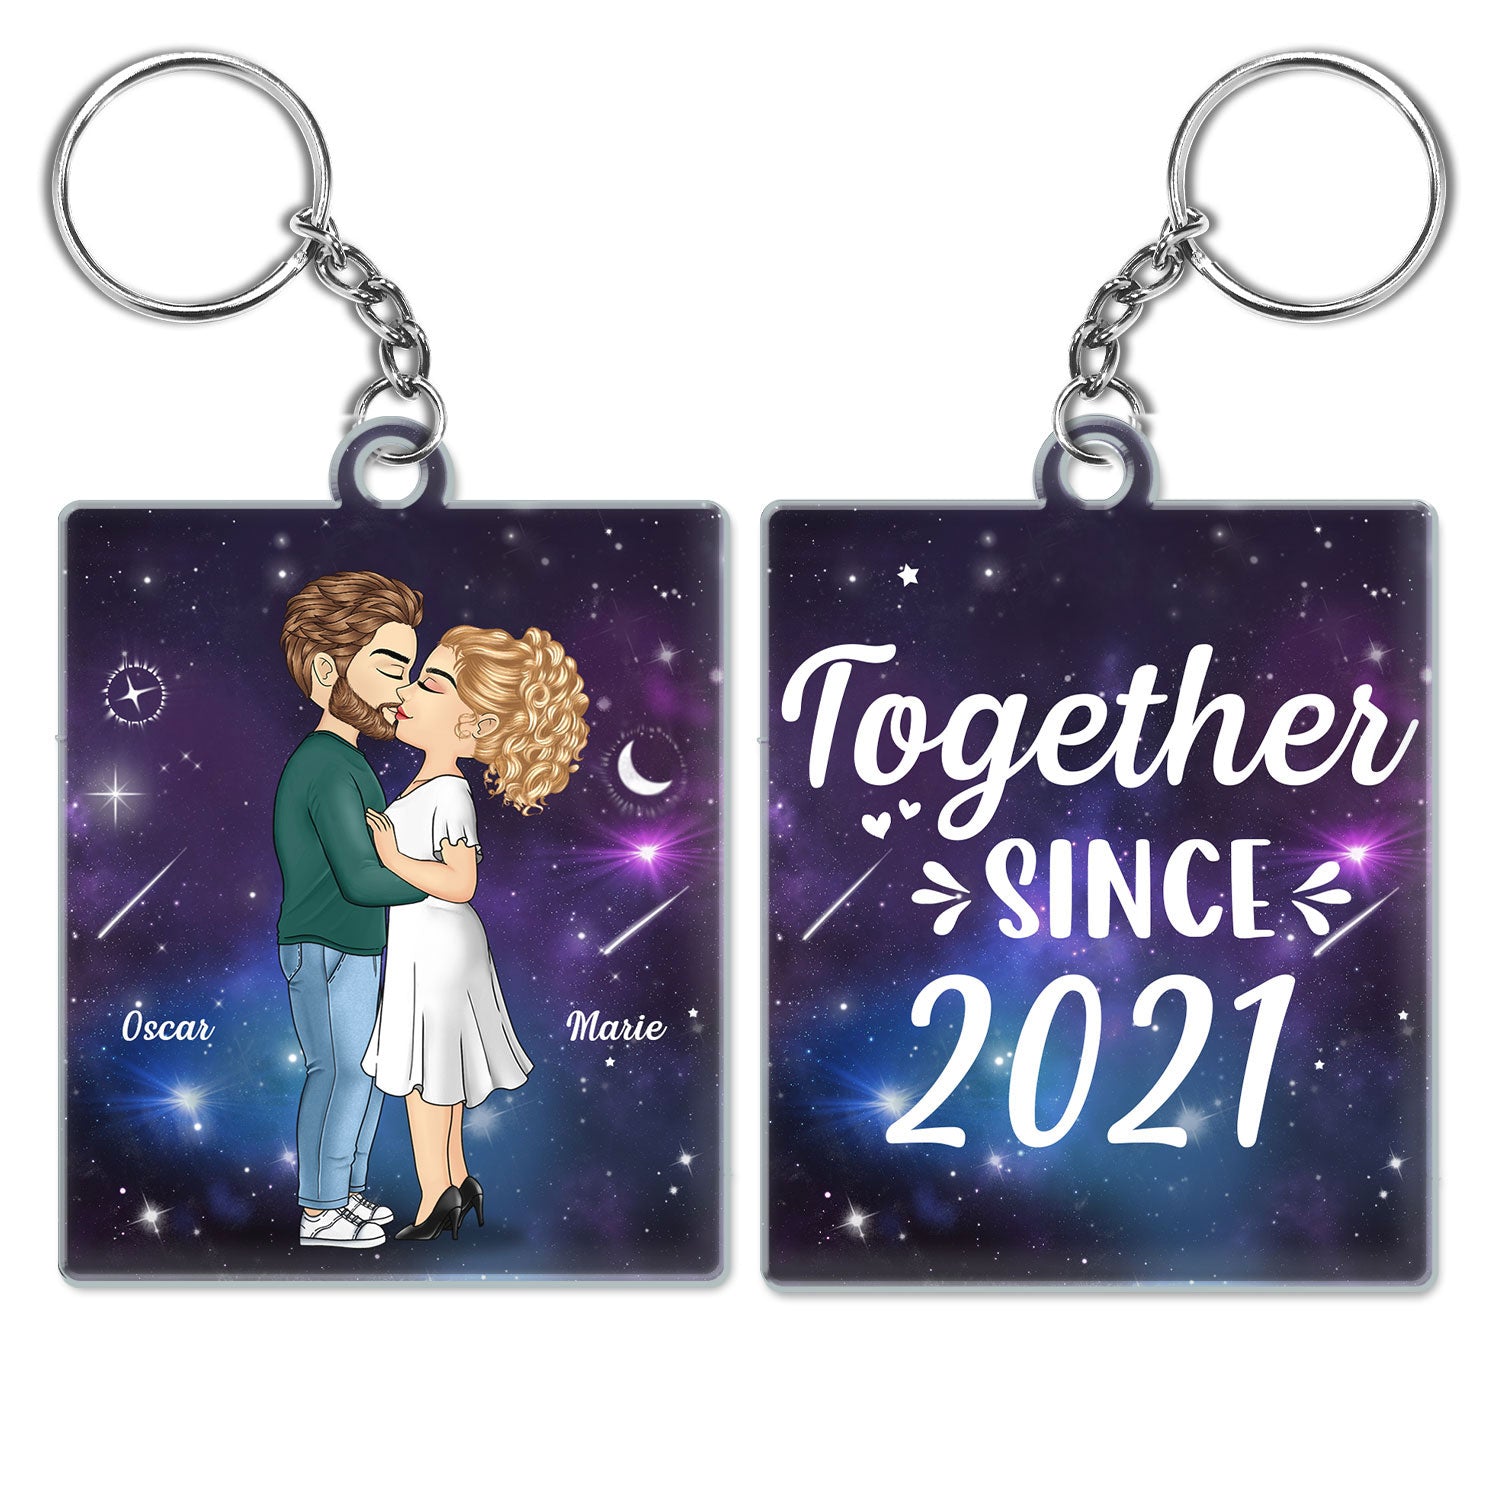 In The Galaxy Sky Chibi Kissing Couple Sideview - Birthday, Loving, Anniversary Gift For Spouse, Husband, Wife, Married Couple, Boyfriend, Girlfriend - Personalized Acrylic Keychain